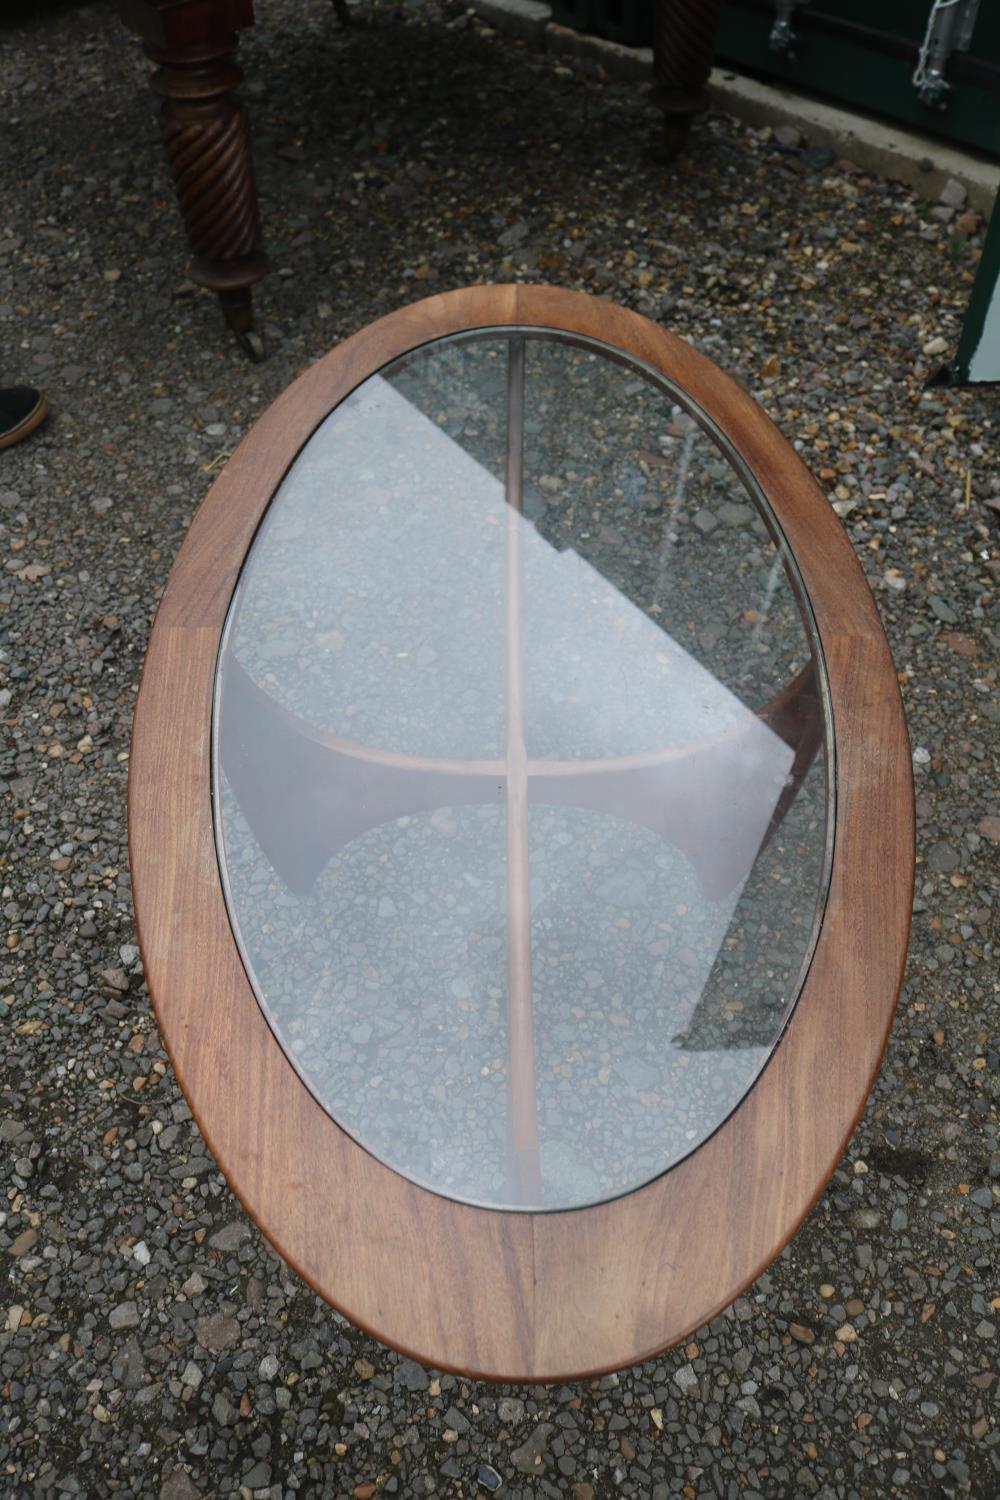 G-Plan Astro Oval Coffee table 1960s by Gordon Murray 122cm in Diameter - Image 3 of 3